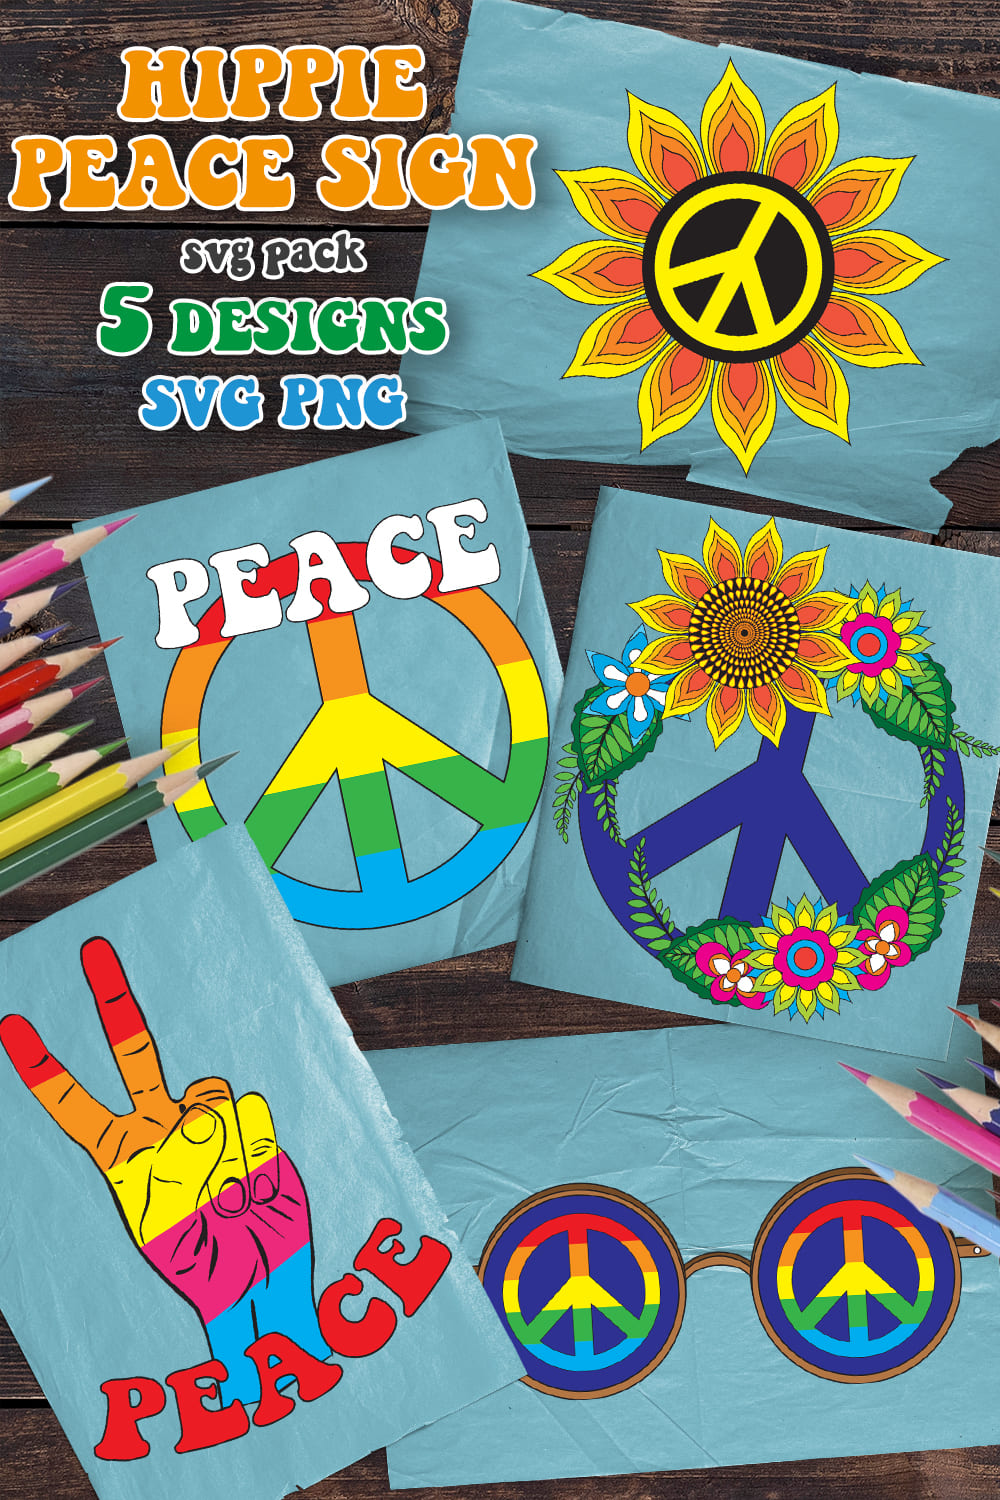 Preview hippie peace sign.